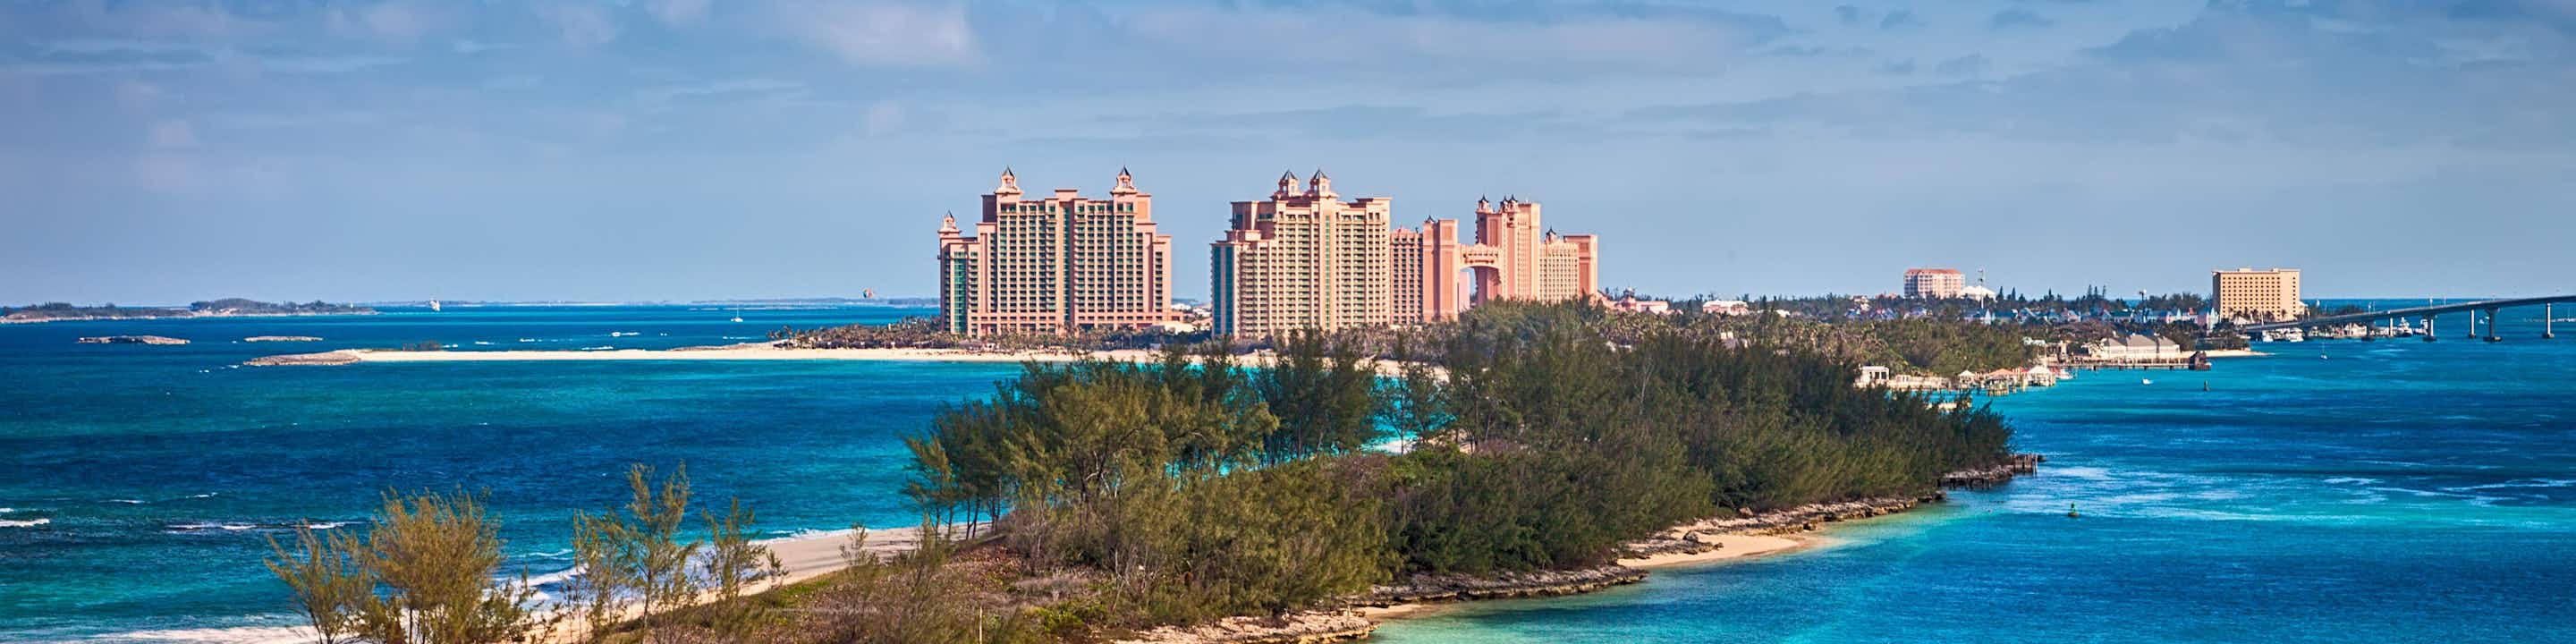 25 BEST Bahamas Cruises 2021 (Prices + Itineraries) Cruises to the